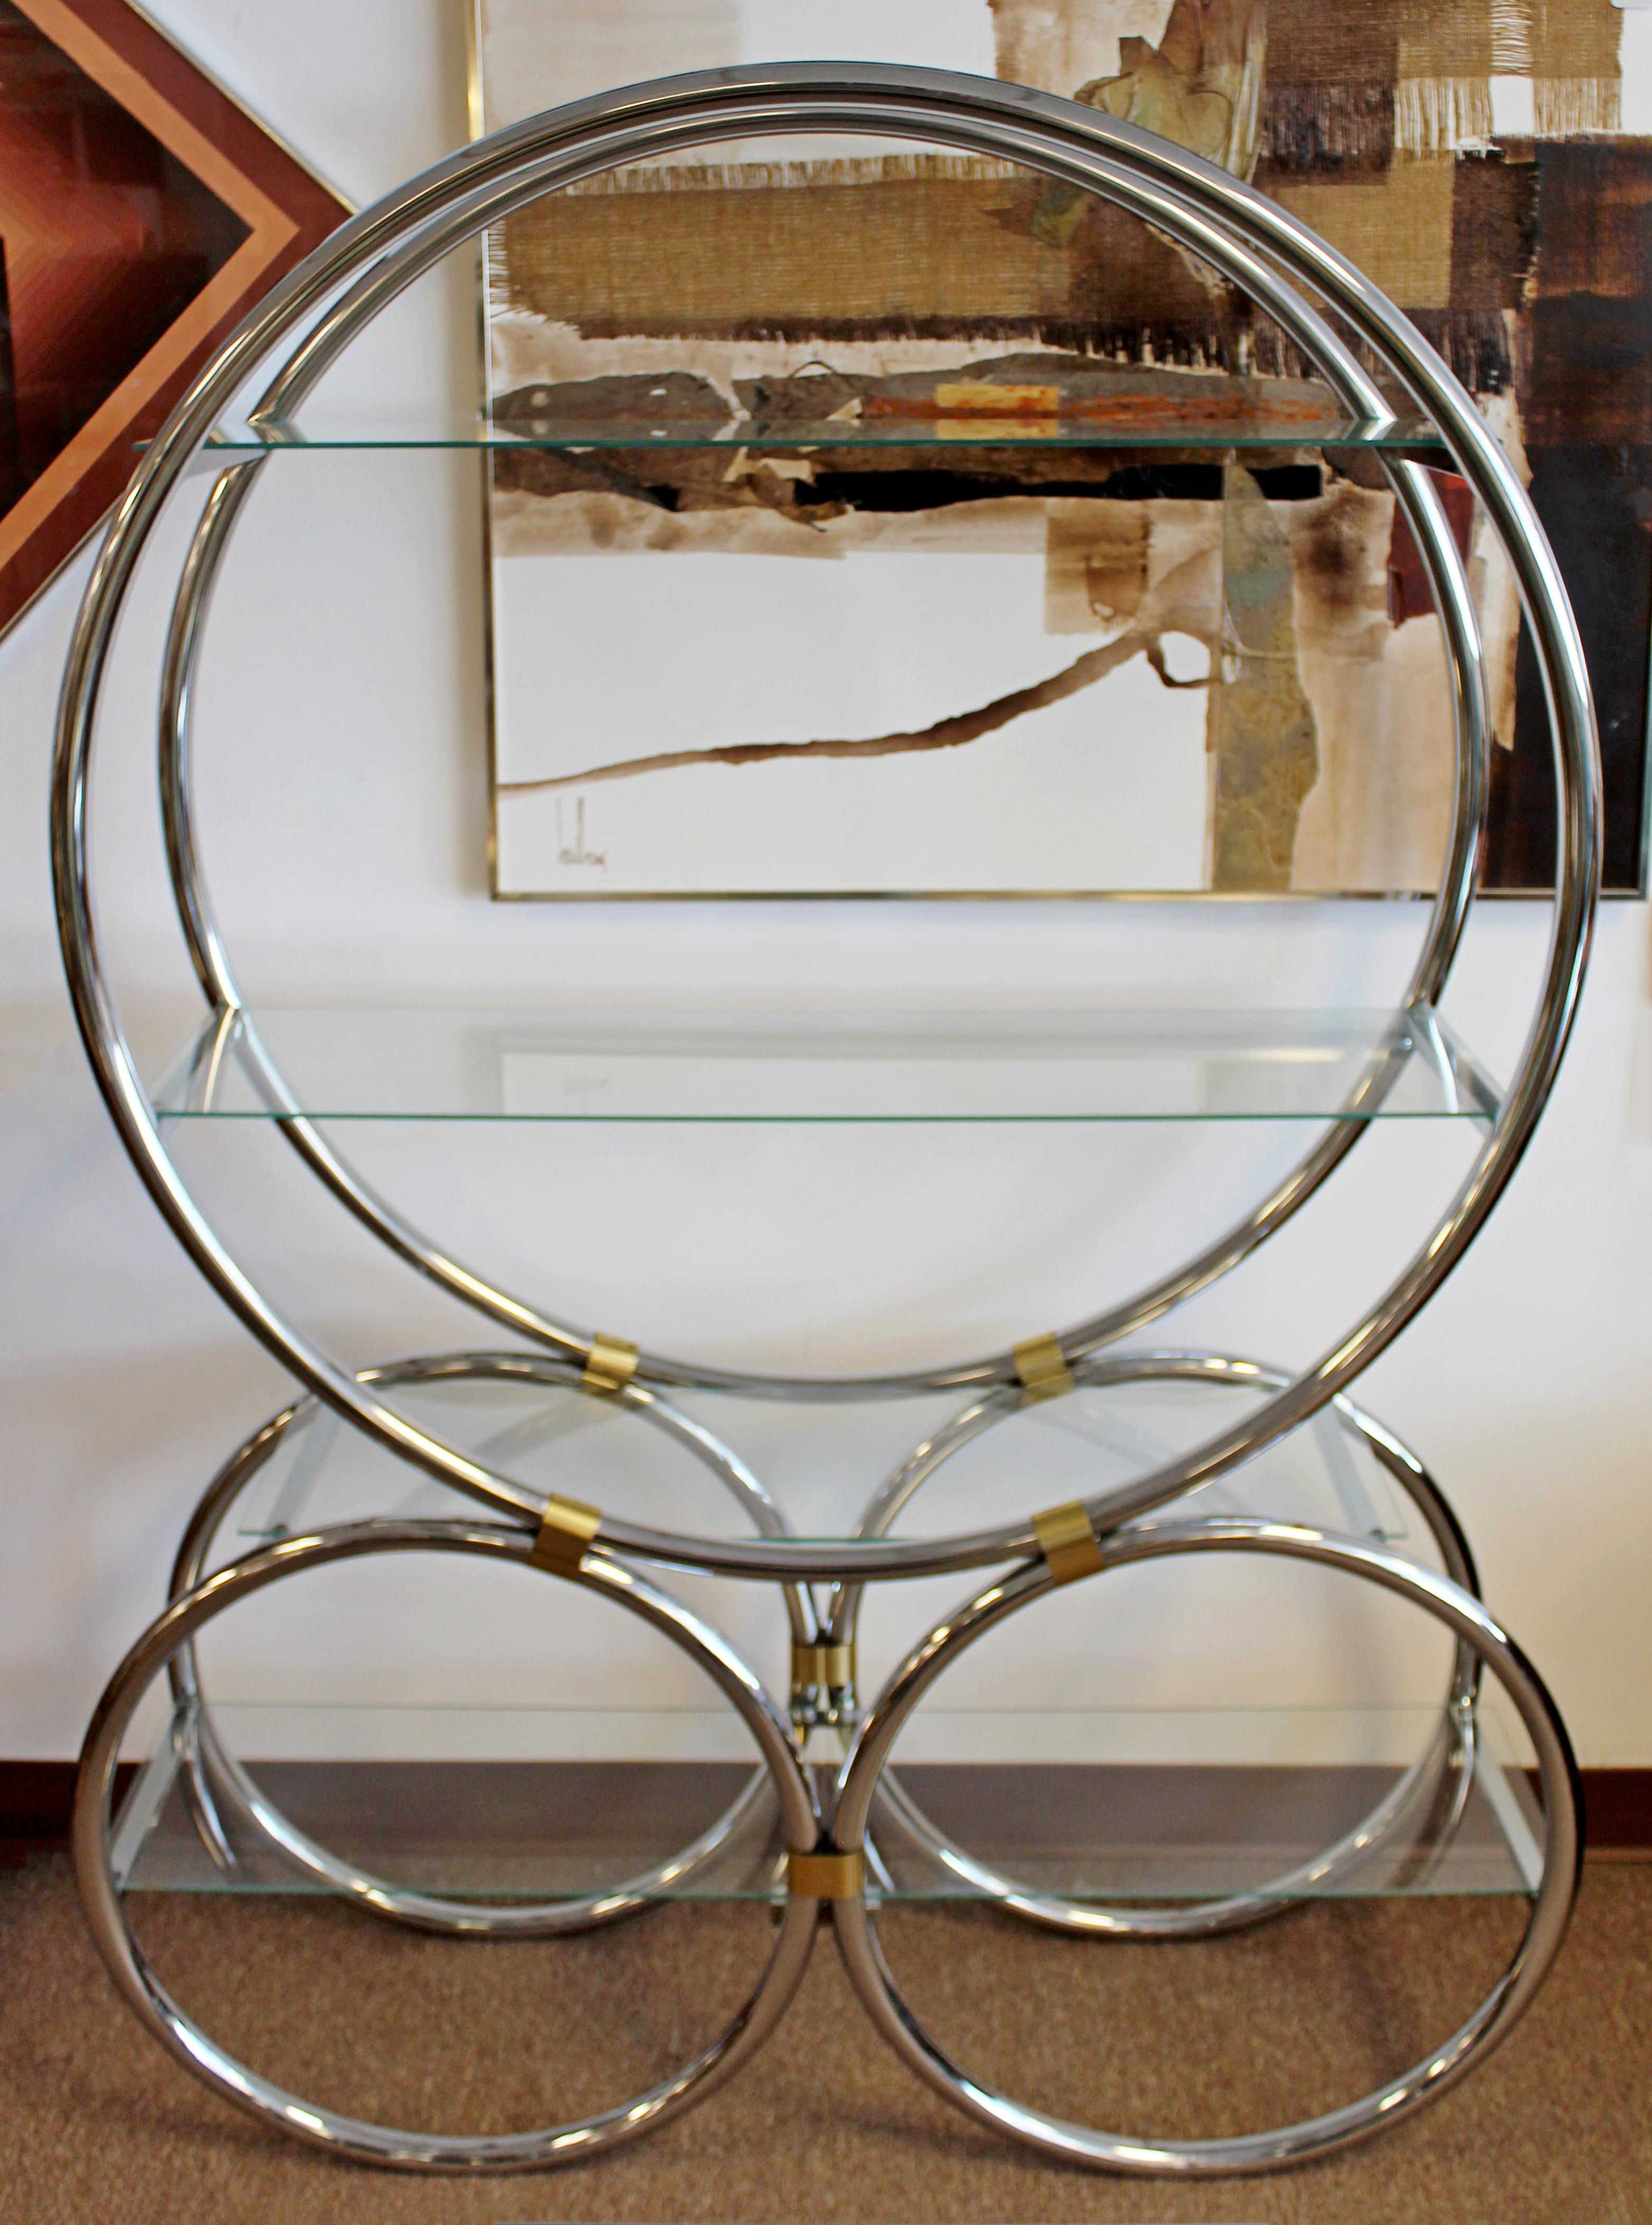 For your consideration is a sensational, chrome and brass shelving unit étagère, with four glass shelves, circa 1940s. In excellent vintage condition. The dimensions are 48